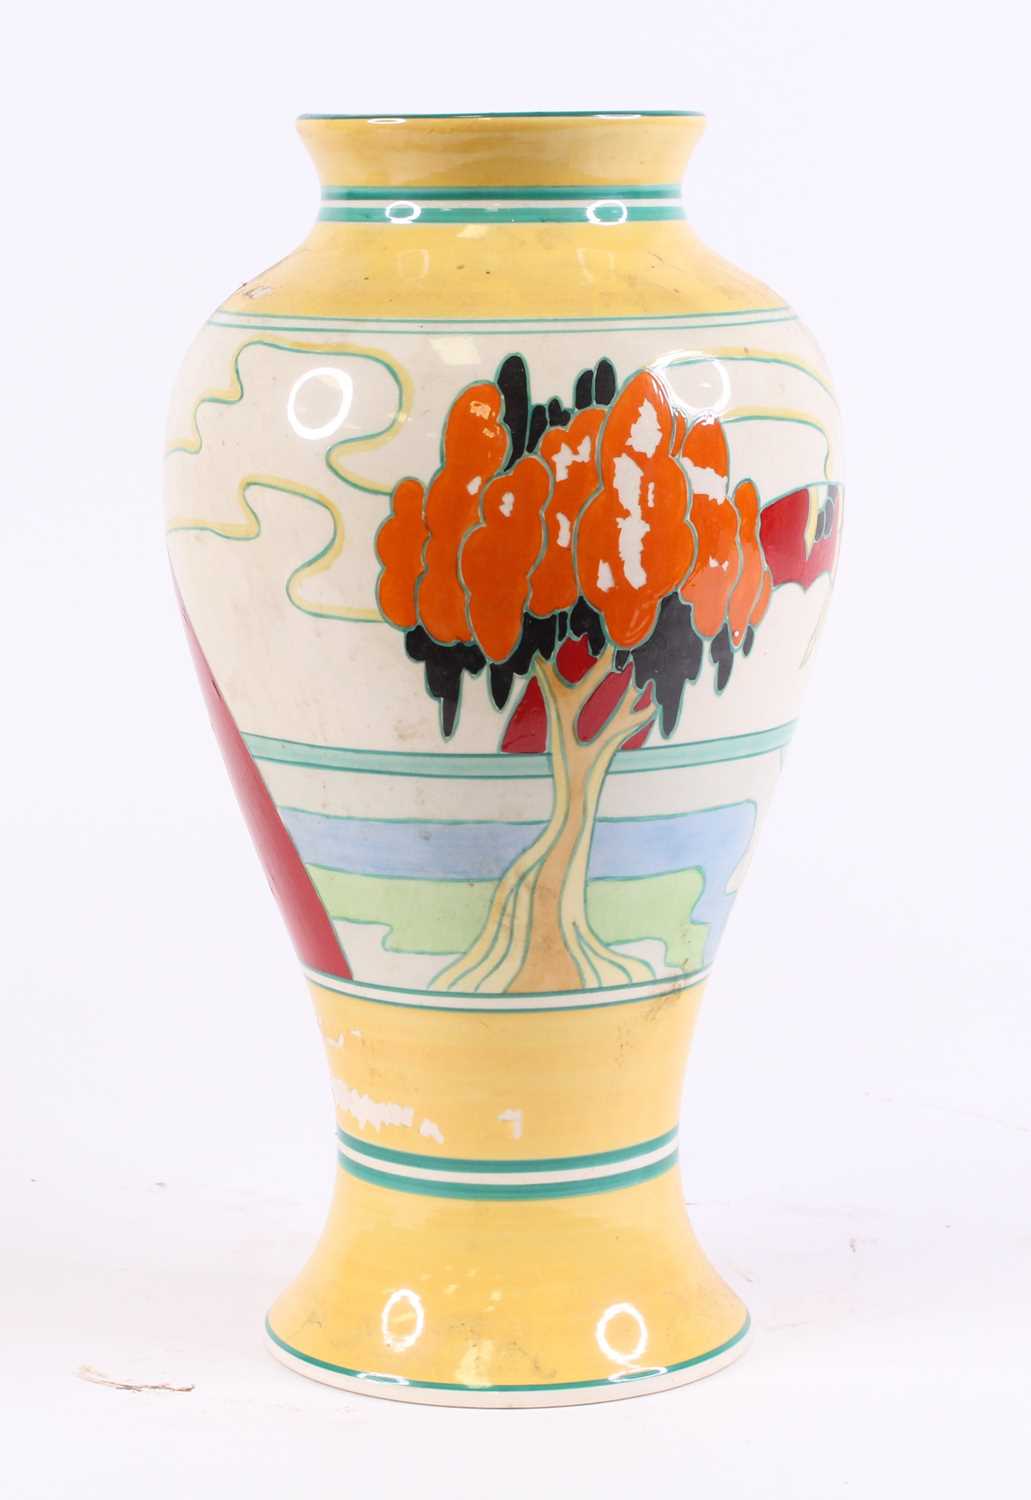 Lot 12 - A Wedgwood Clarice Cliff re-issue vase of...